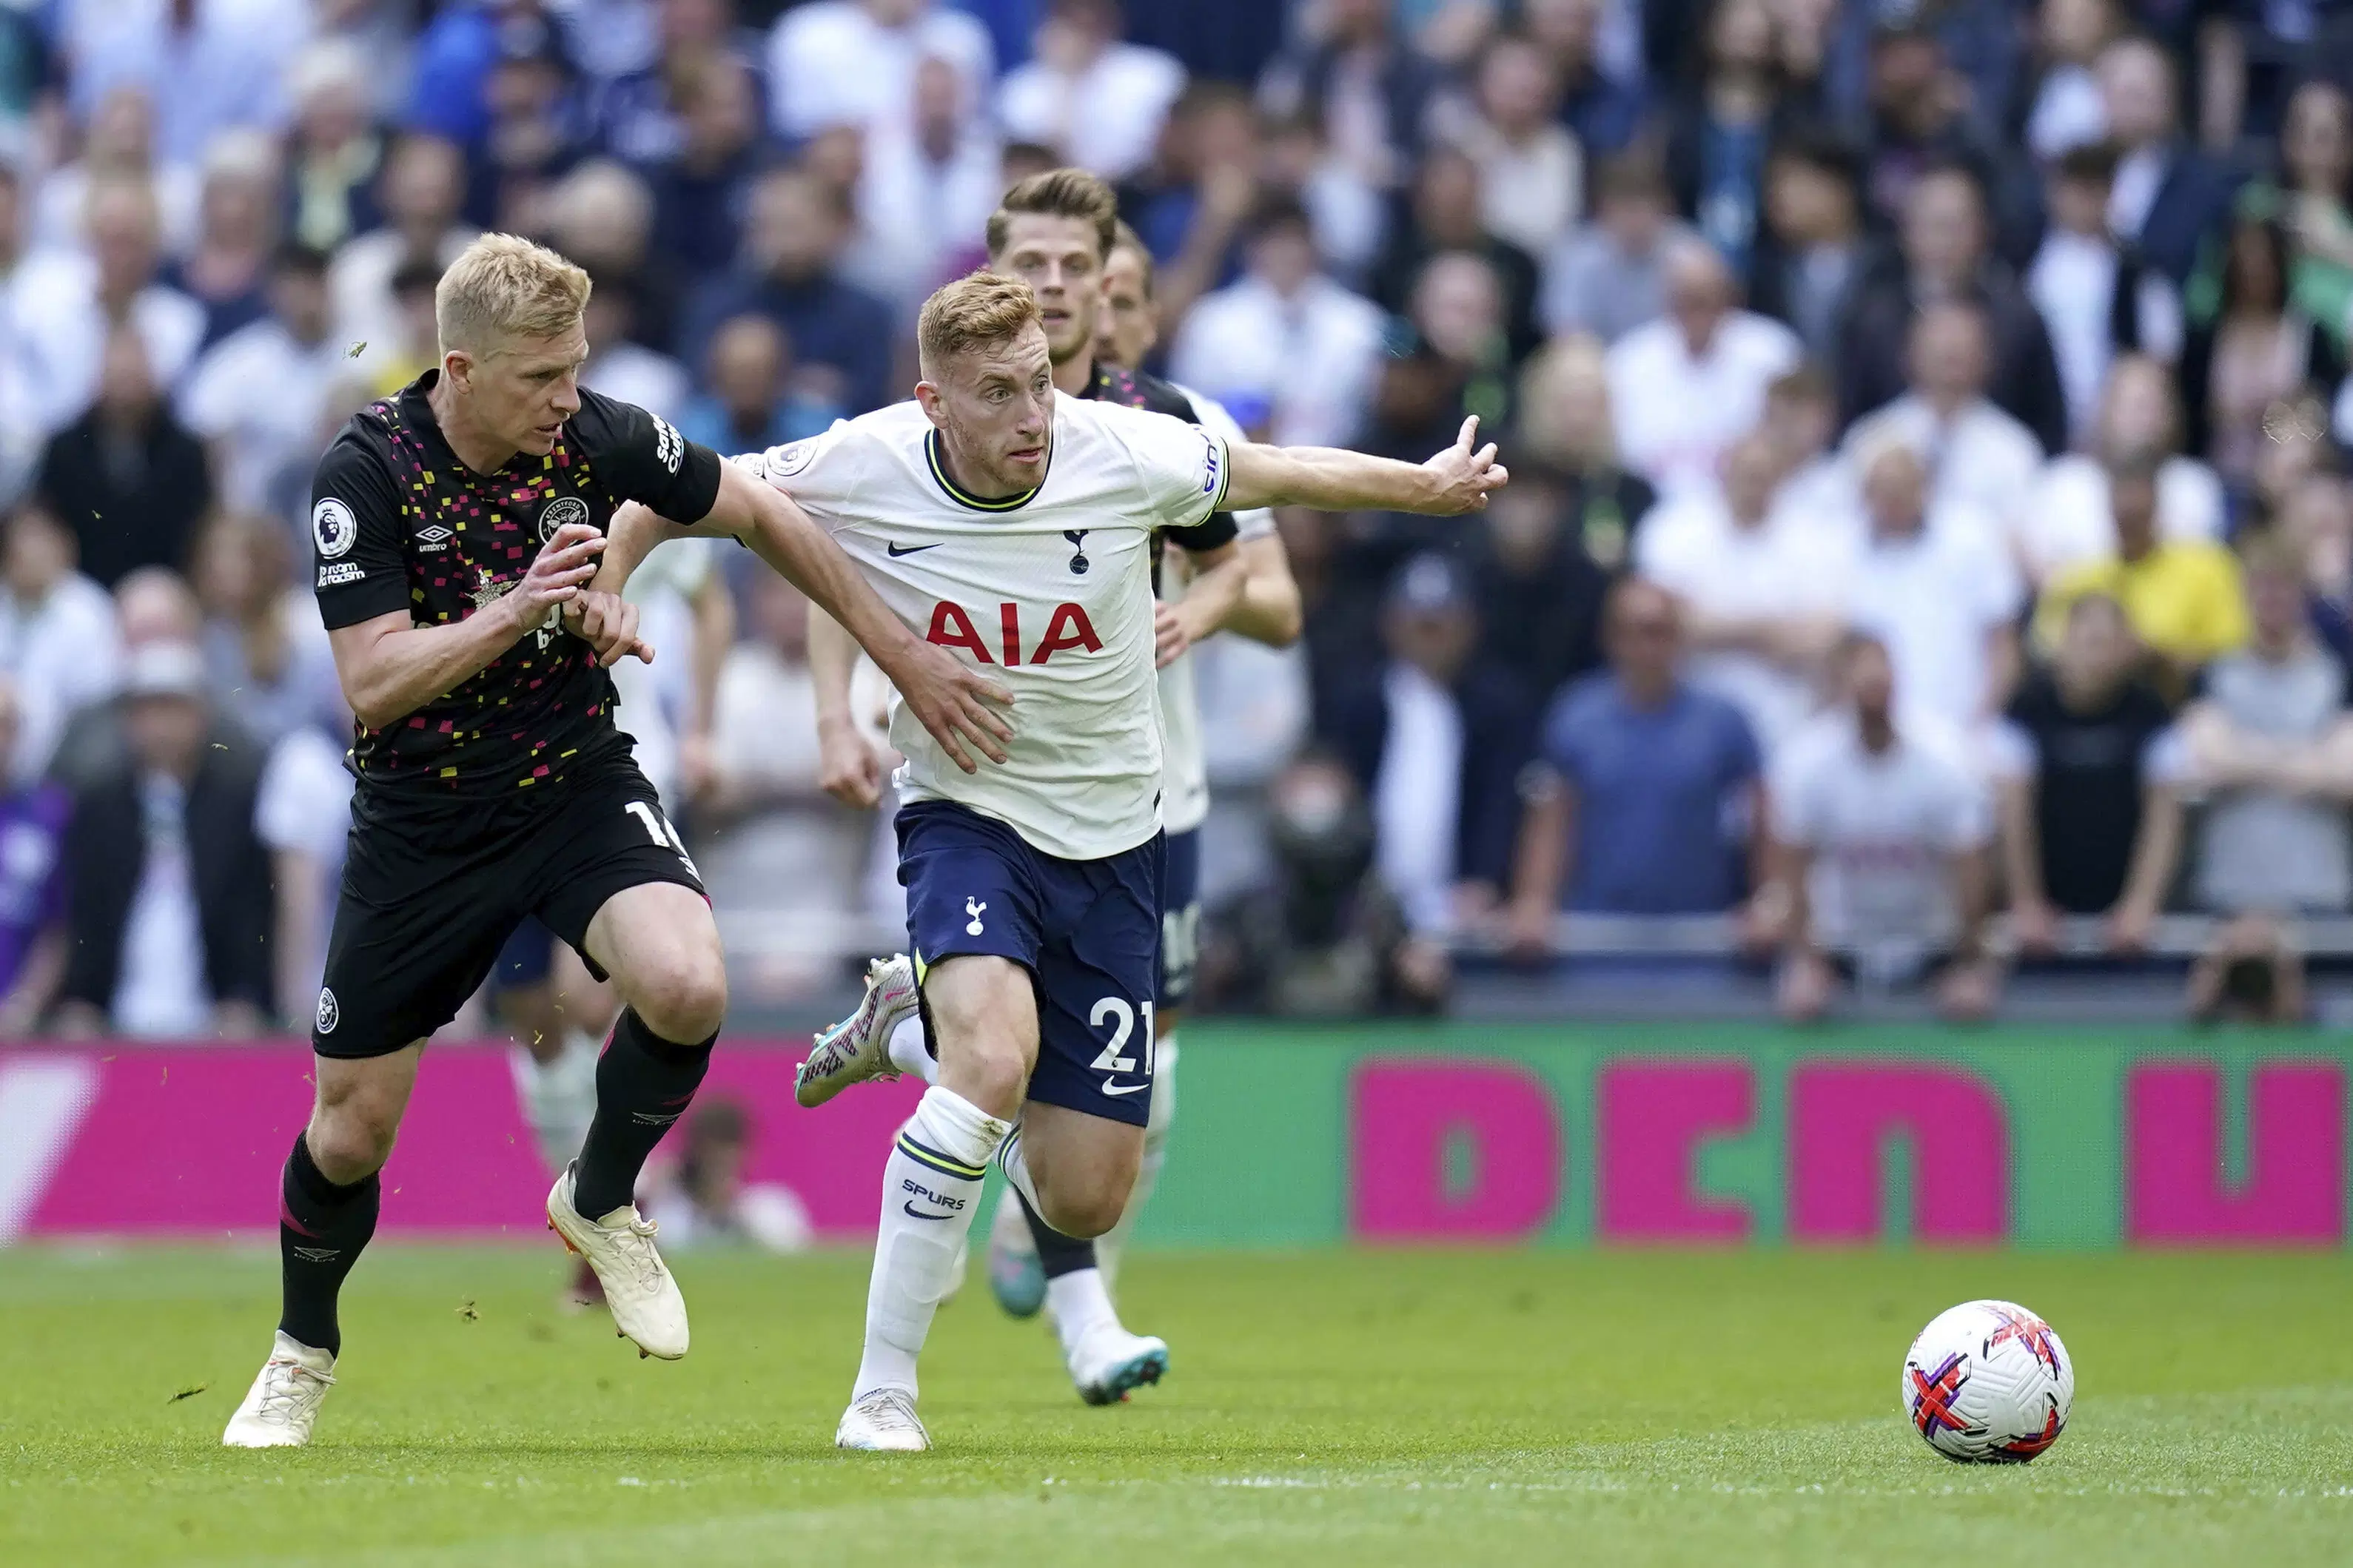 Tottenham vs Brentford results: Once superior, Spurs fell 1-3 at home